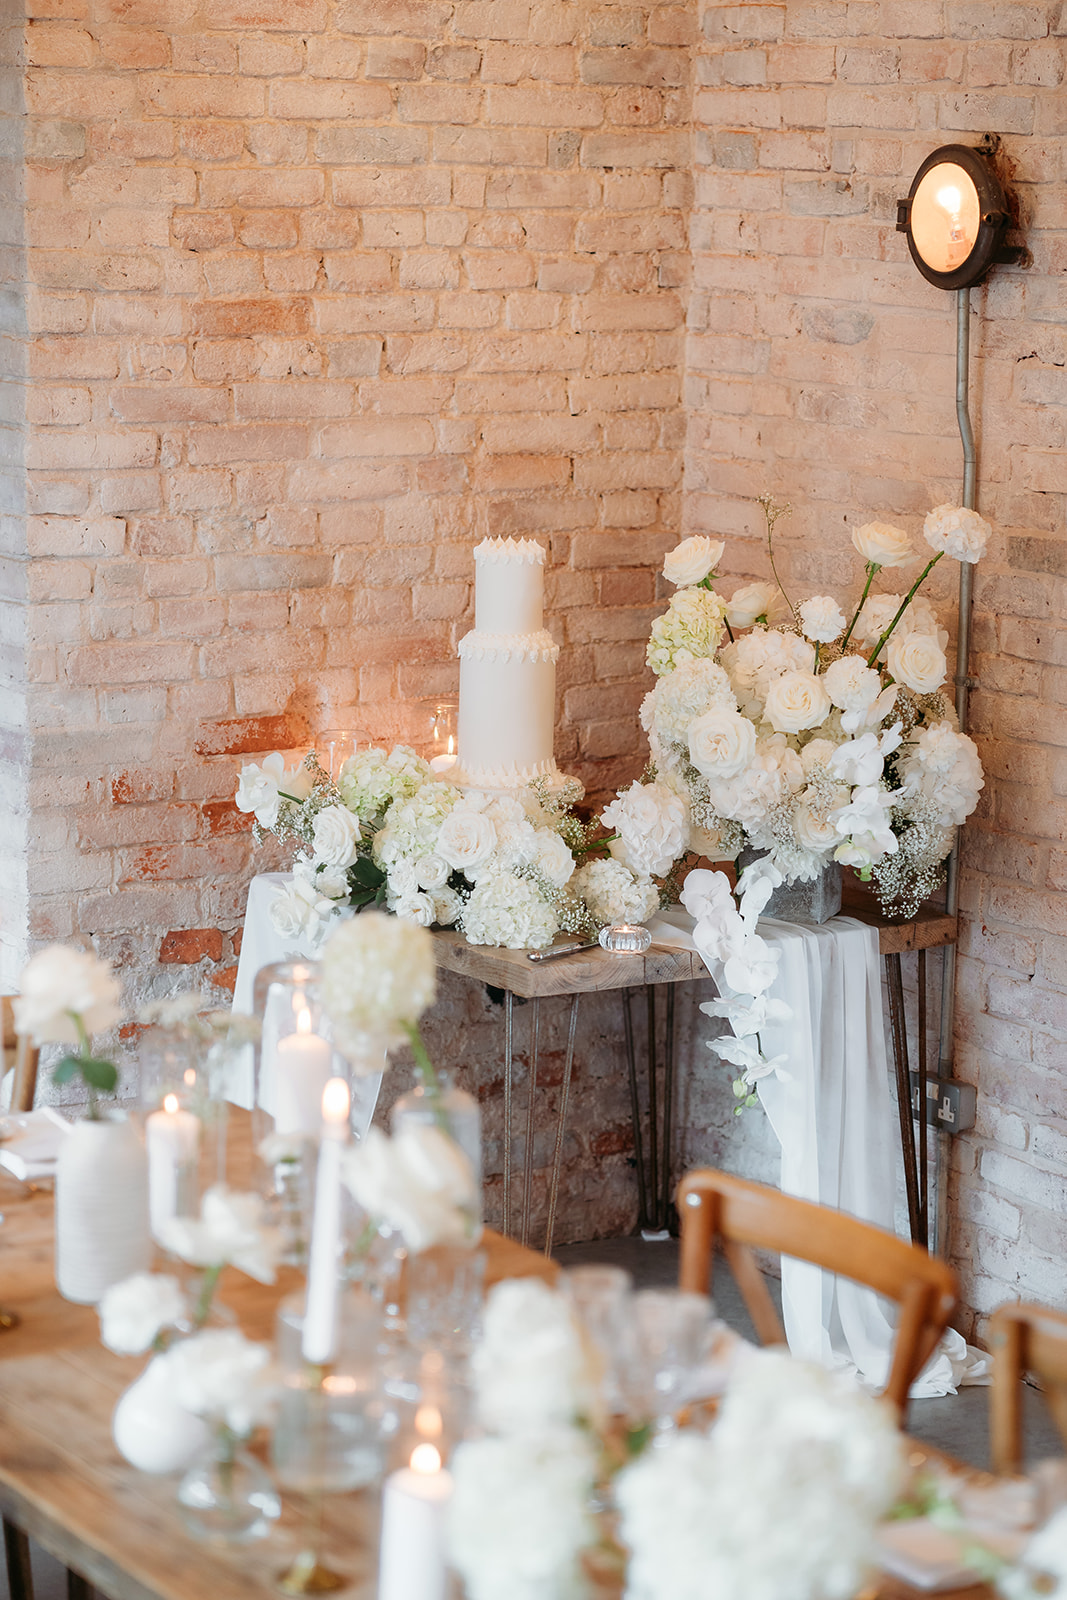 An intimate modern chic white themed luxury wedding at Iscoyd Park for Australian couple by Kamila Novak Photography